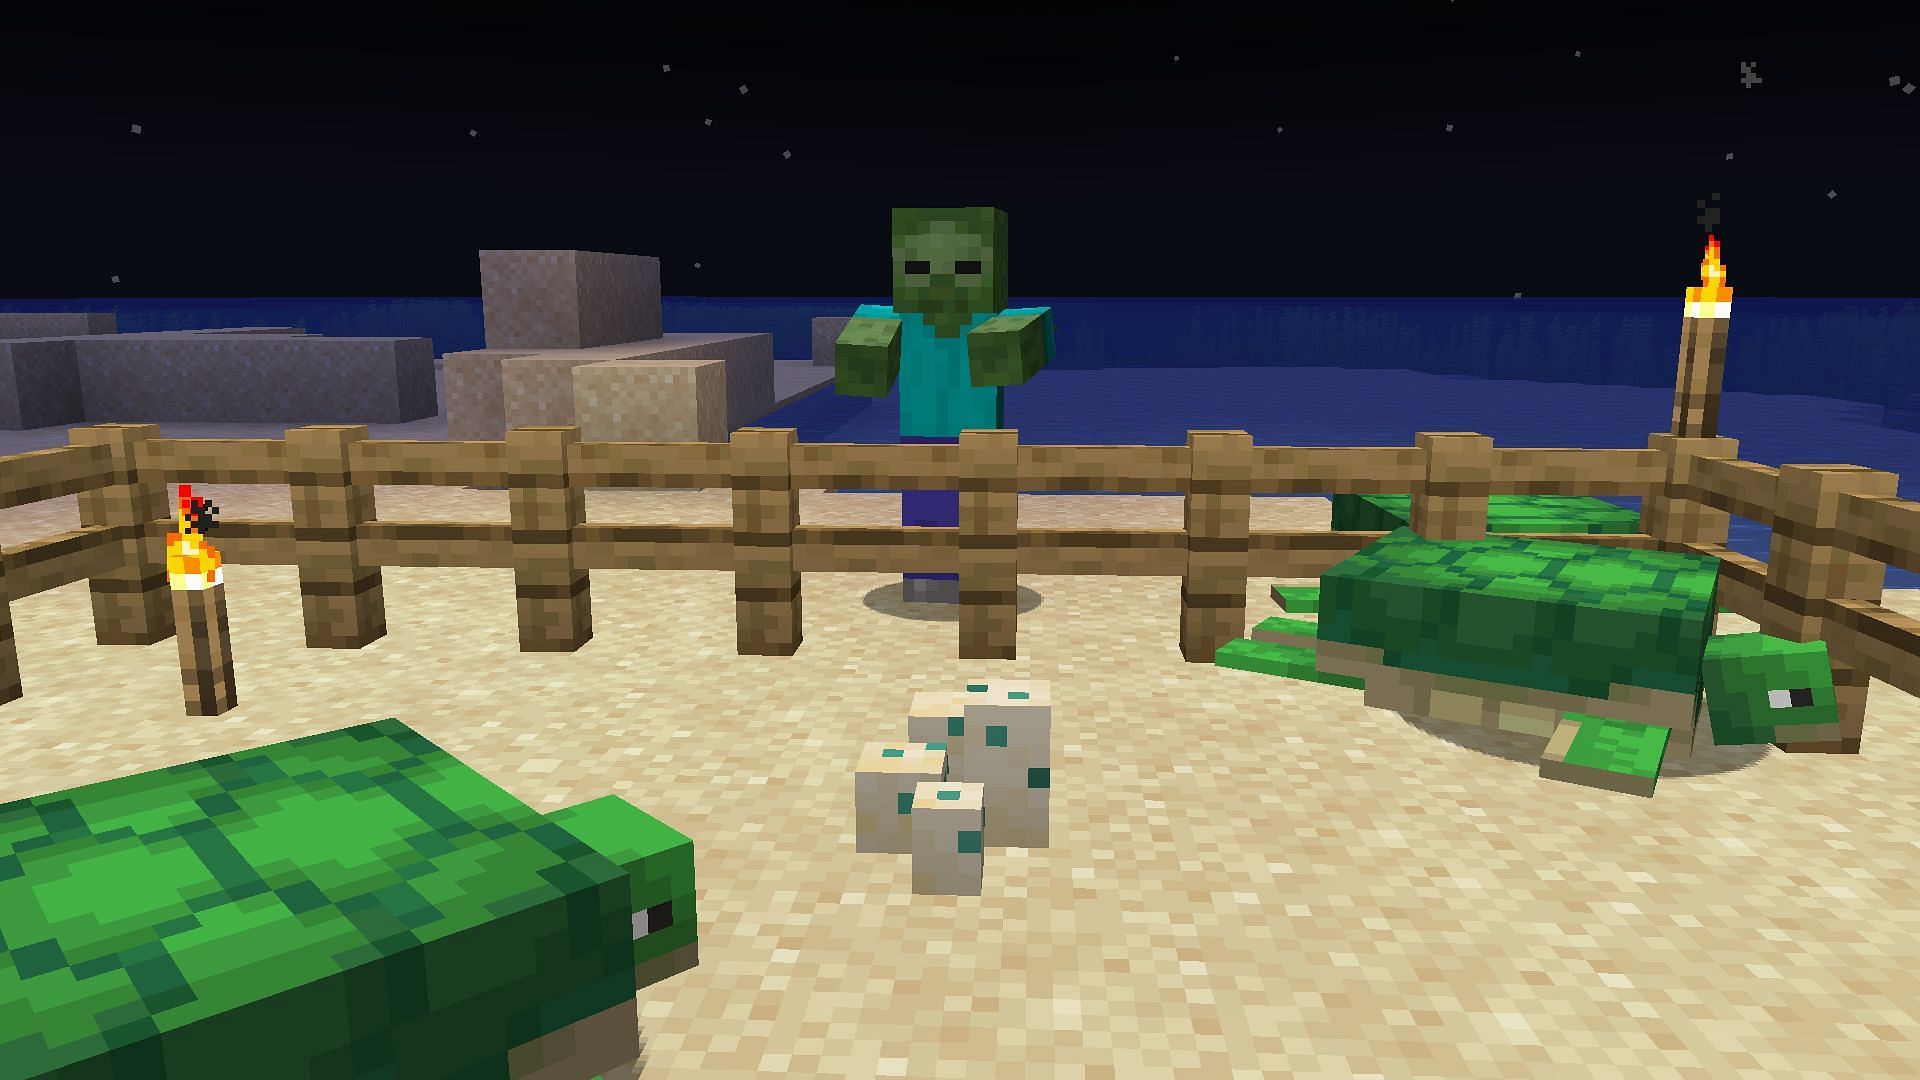 Protect the eggs from all dangers (Image via Minecraft 1.18)